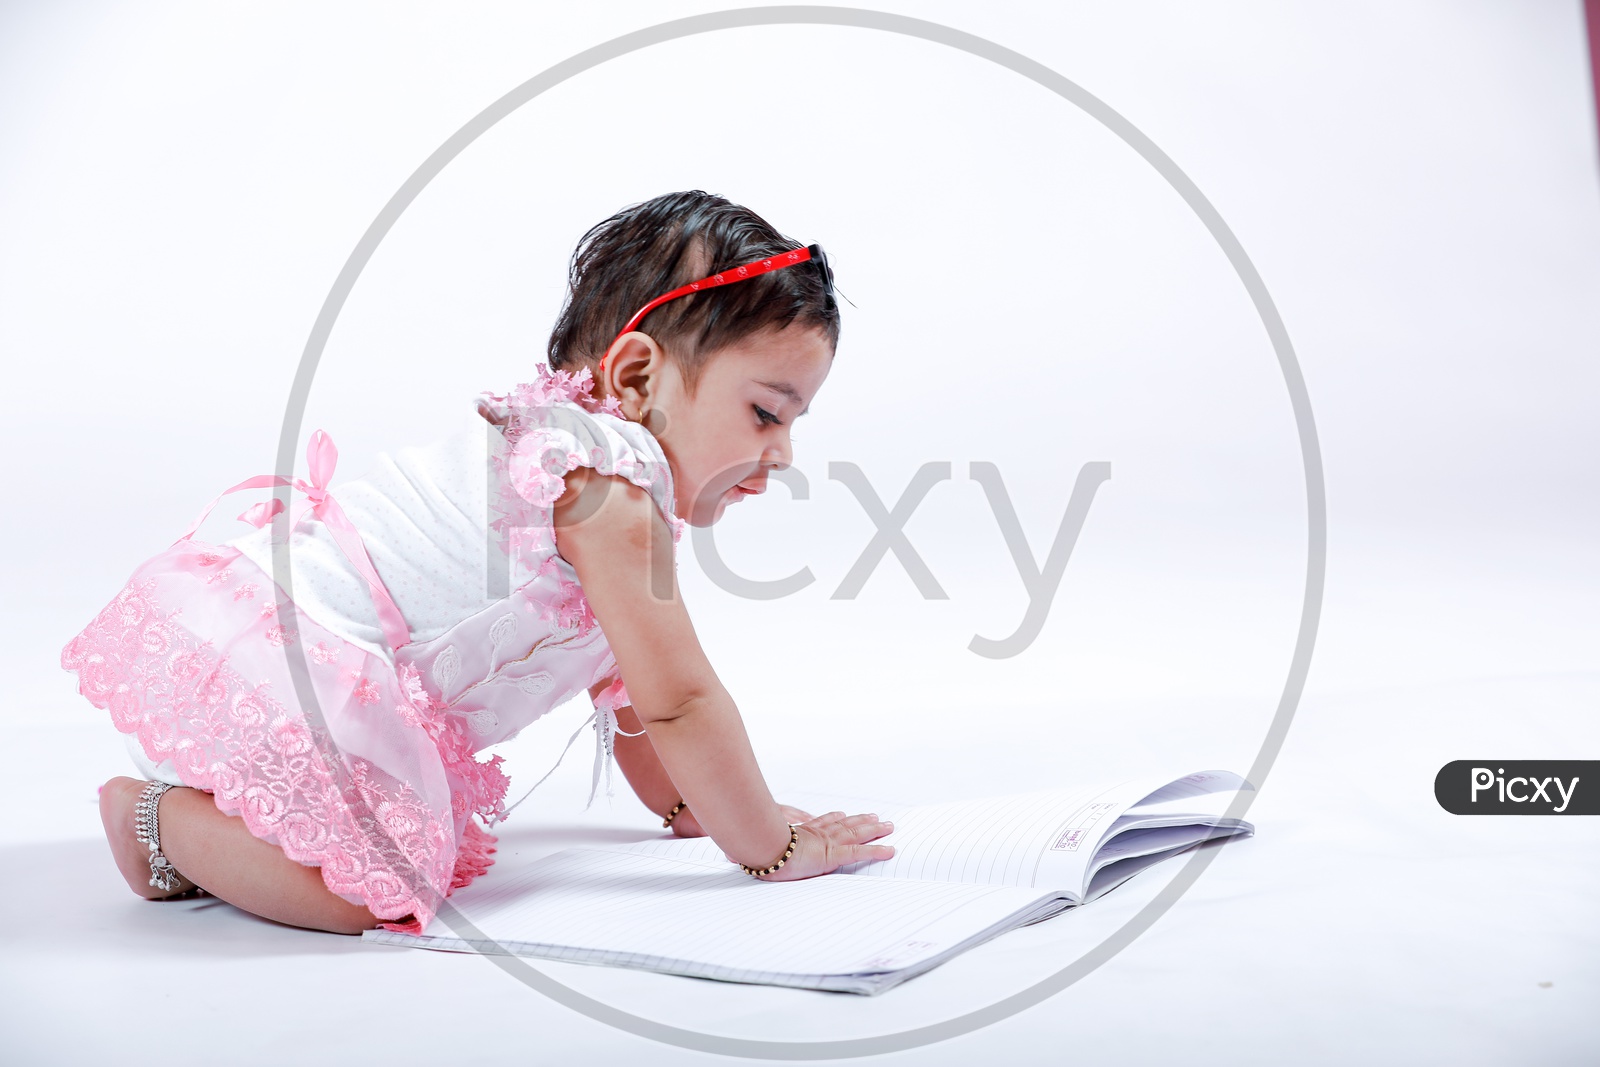 Cute Indian Baby Girl With Book